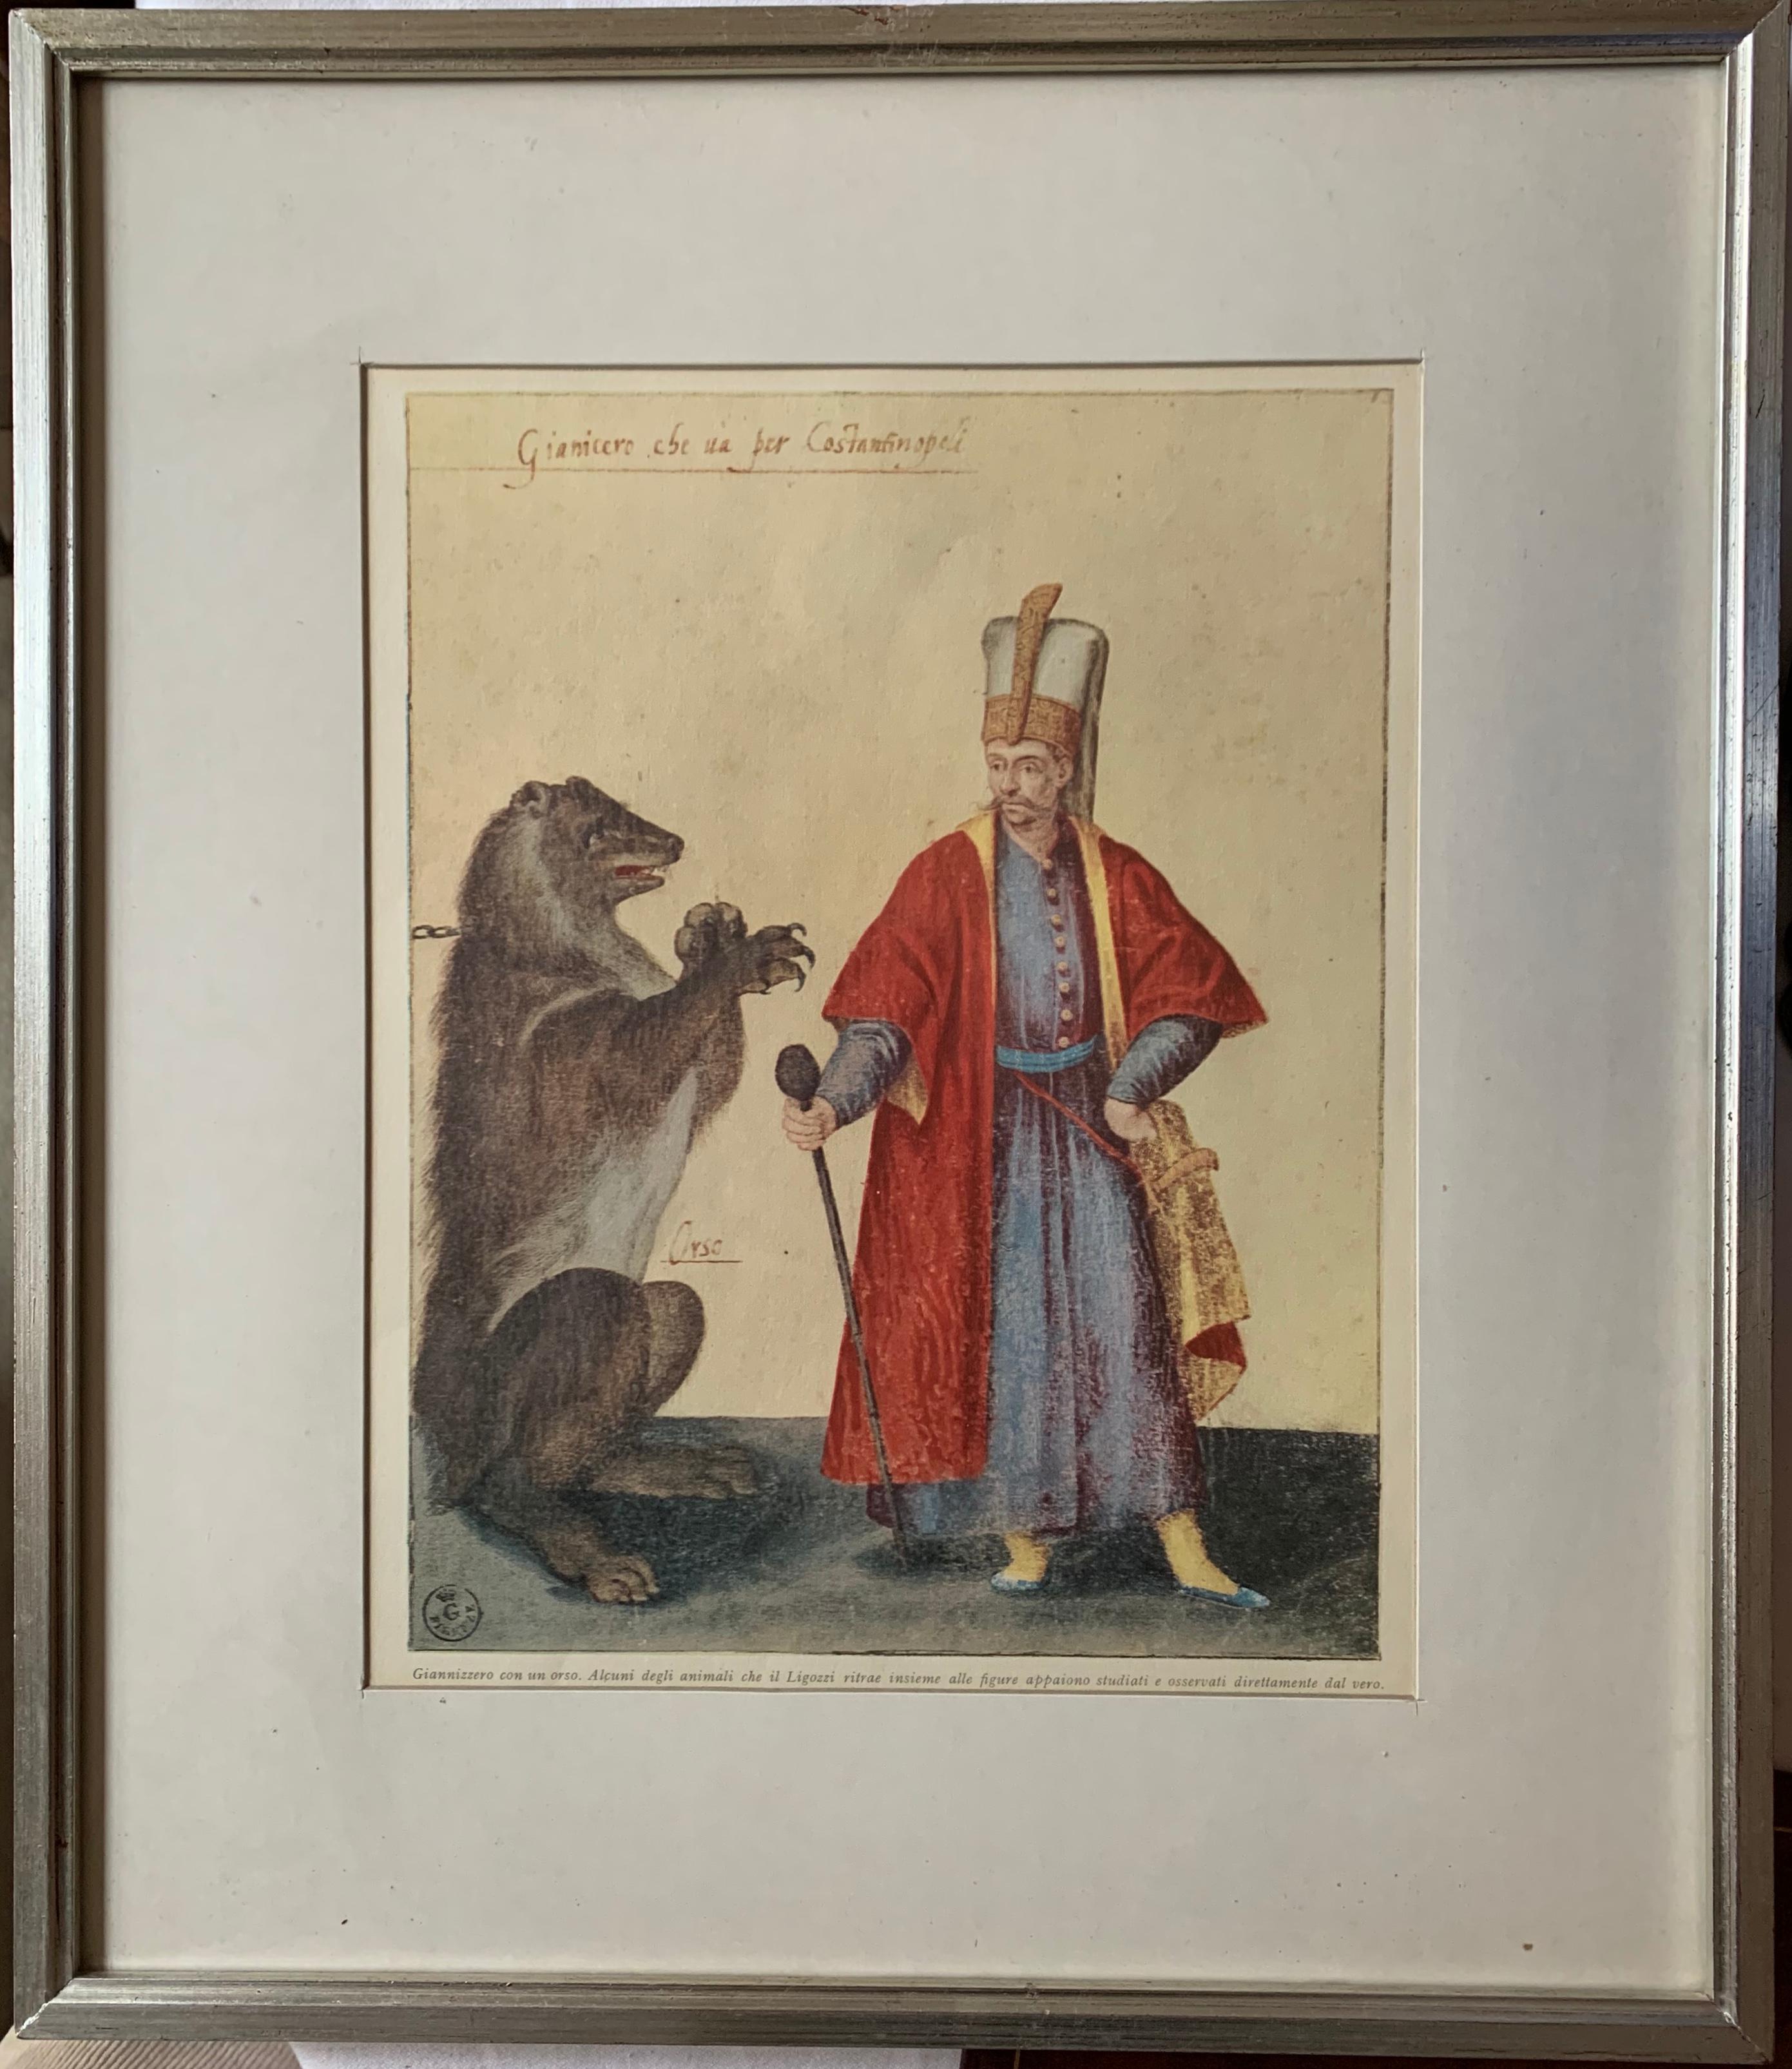 Set of ten prints of Ottoman figures with animals. Beautifully decorative assemblage of ten vintage silver framed prints of 16th century engravings by Jacopo Ligozzi of fabulously attired Ottoman courtesans, ambassadors, and exotics with attendant